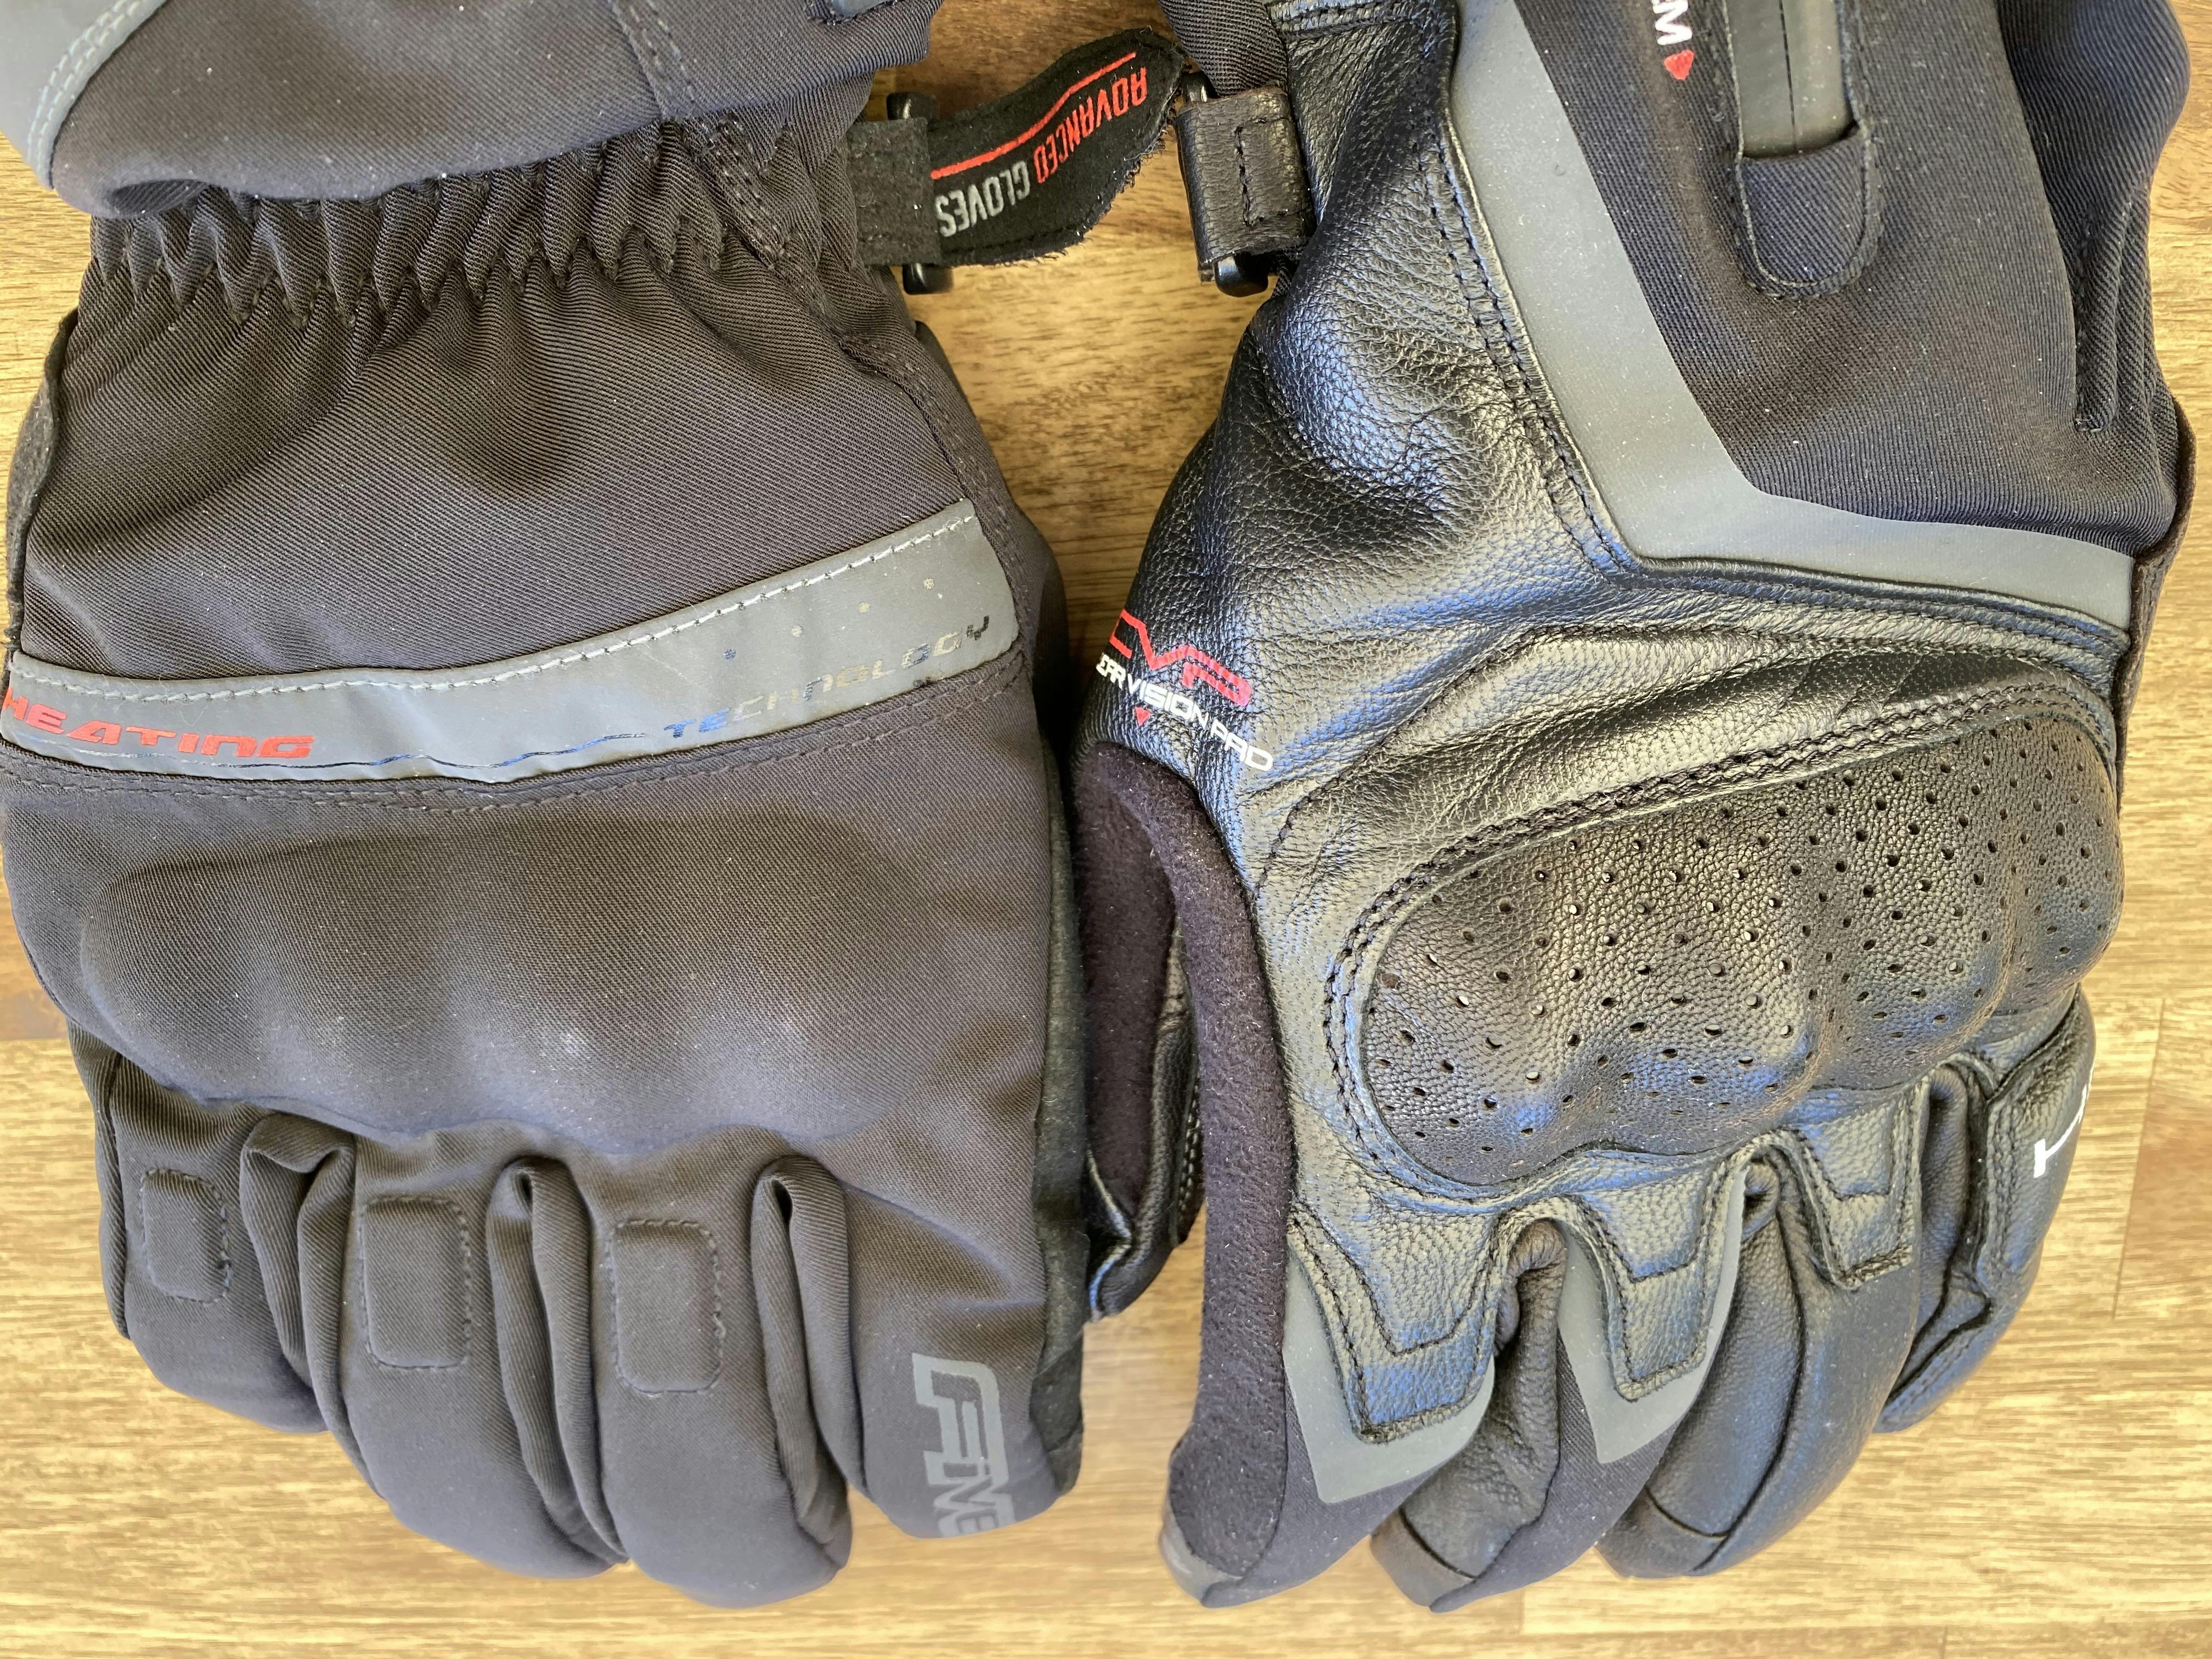 Five HG3 and HG1 heated gloves side by side